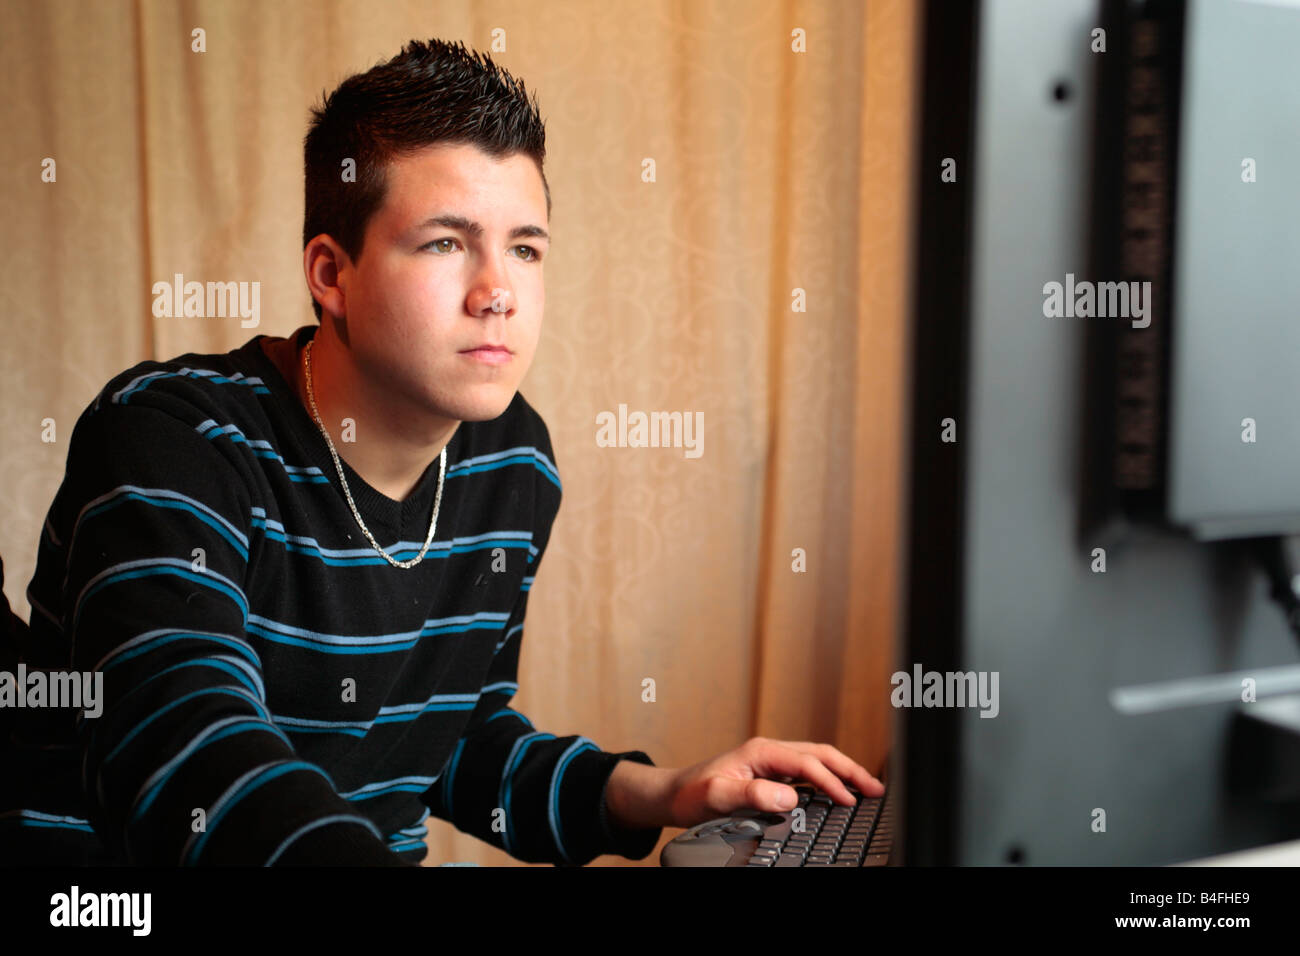 Portait of a teenage boy in front of his computer Stock Photo